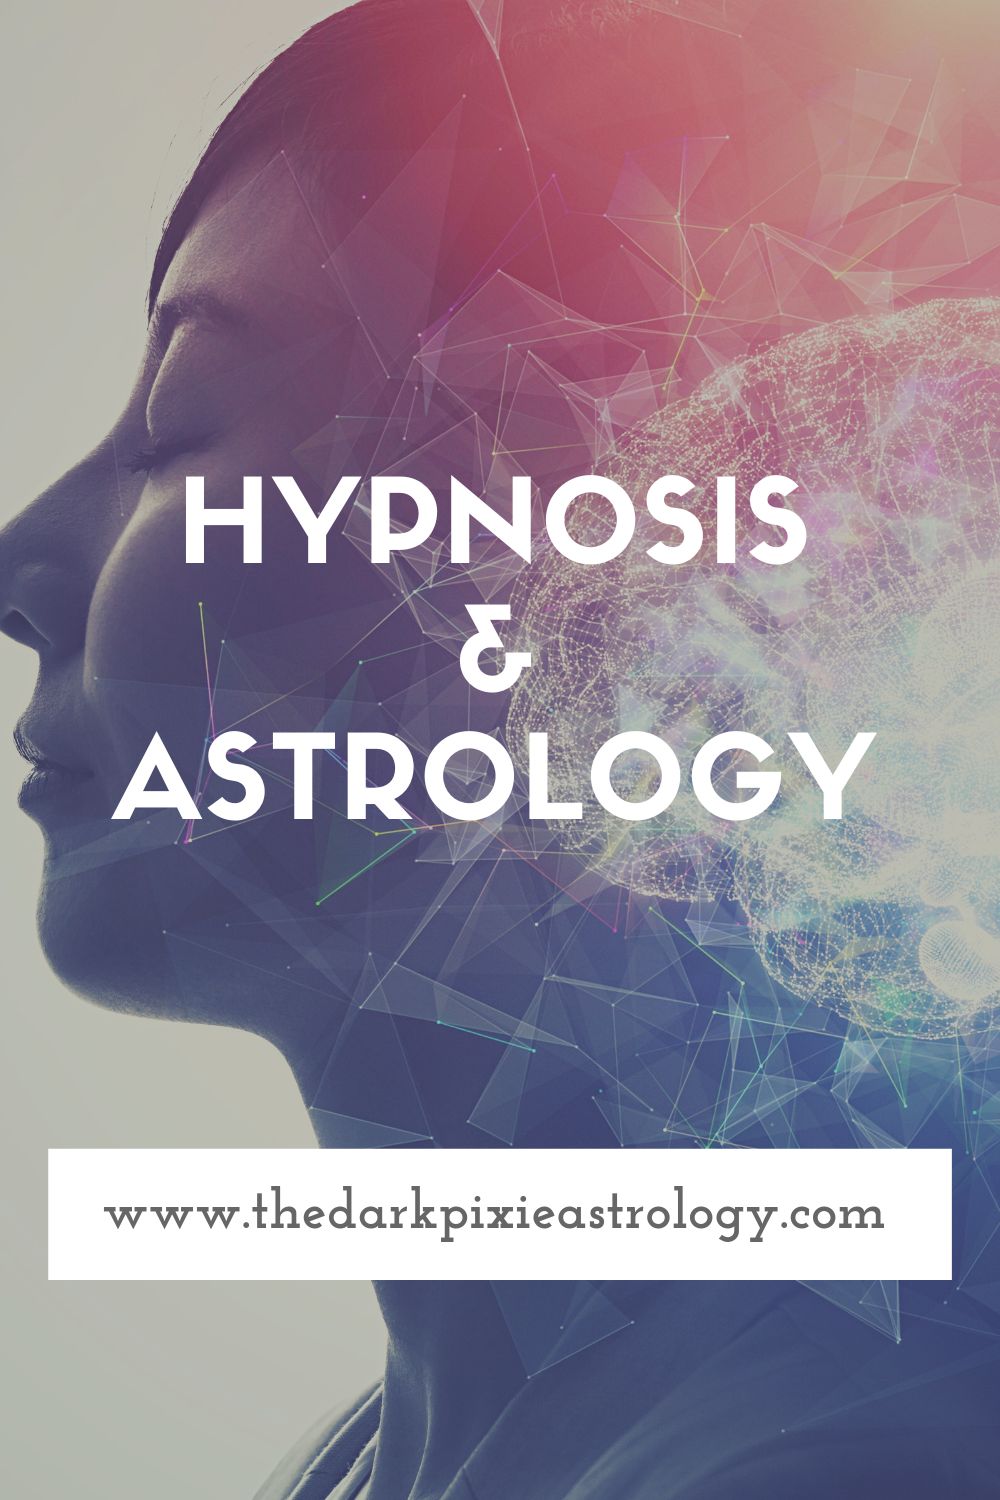 Hypnosis & Astrology by guest Tirra Omilade Hargrow for The Dark Pixie Astrology